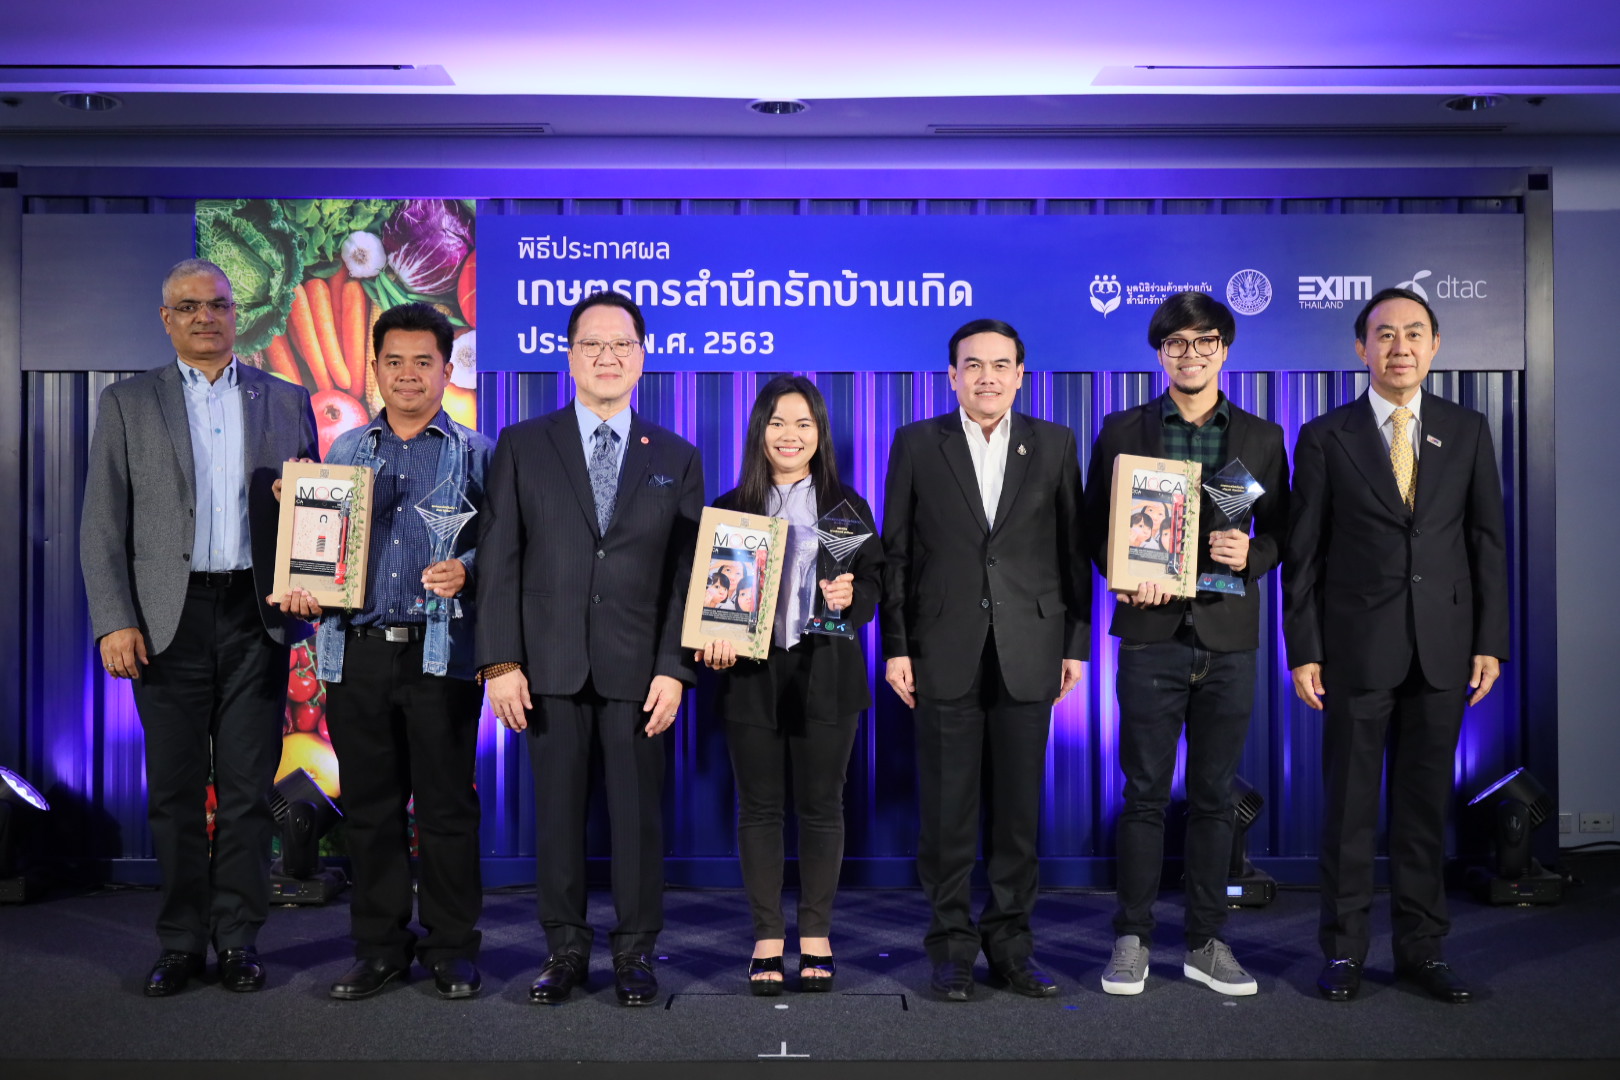 EXIM Thailand Joins Hands with Dtac, Ruam Duay Chuay Kan Sam Nuek Rak Ban Kerd Foundation and Department of Agricultural Extension